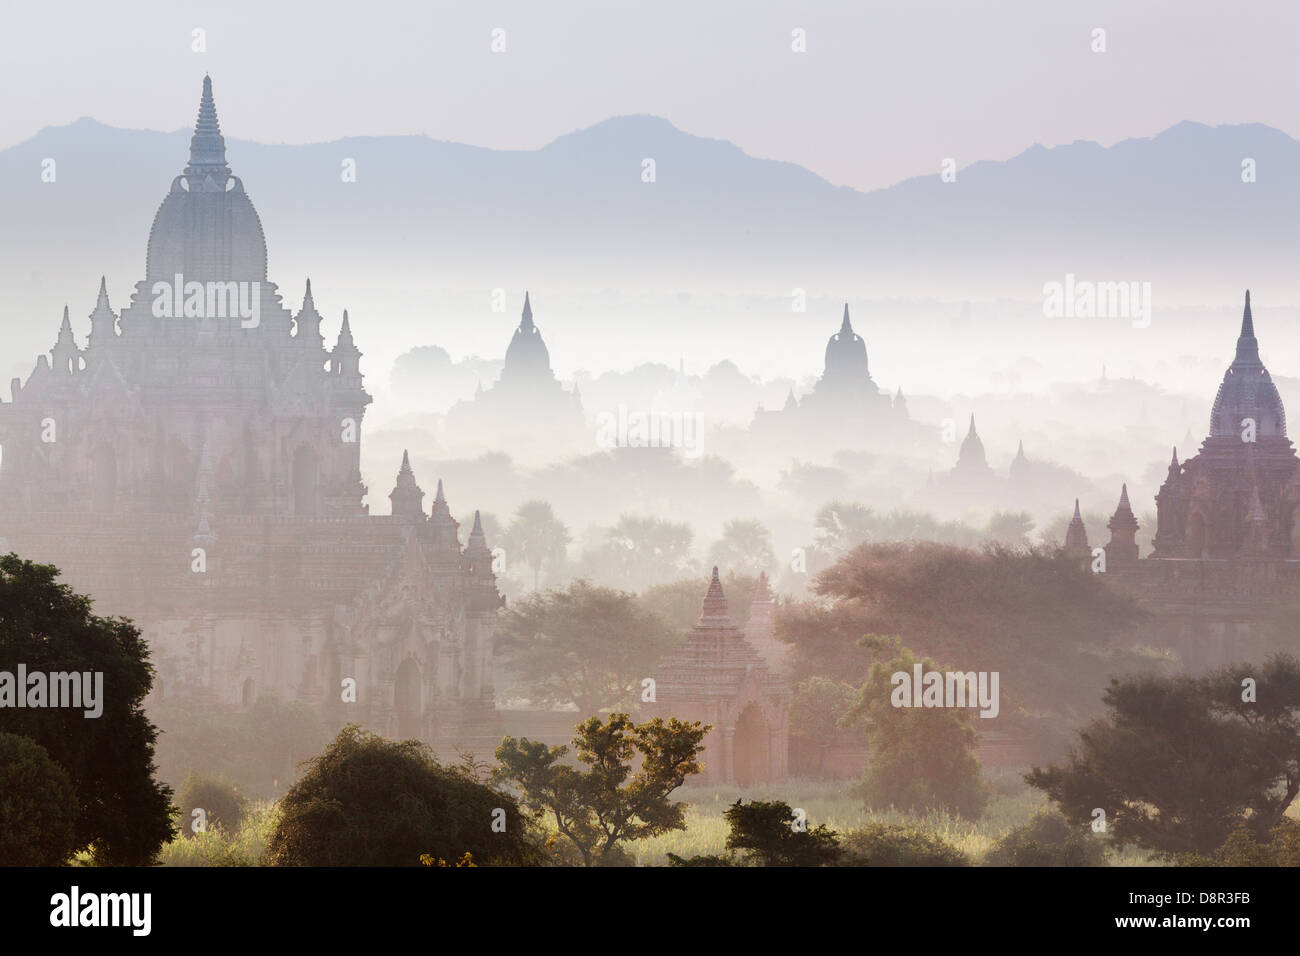 Some of the 4000 ancient temples on the plain of Bagan (or Pagan) in Burma (or Myanmar). A UNESCO World Heritage Site.. Stock Photo